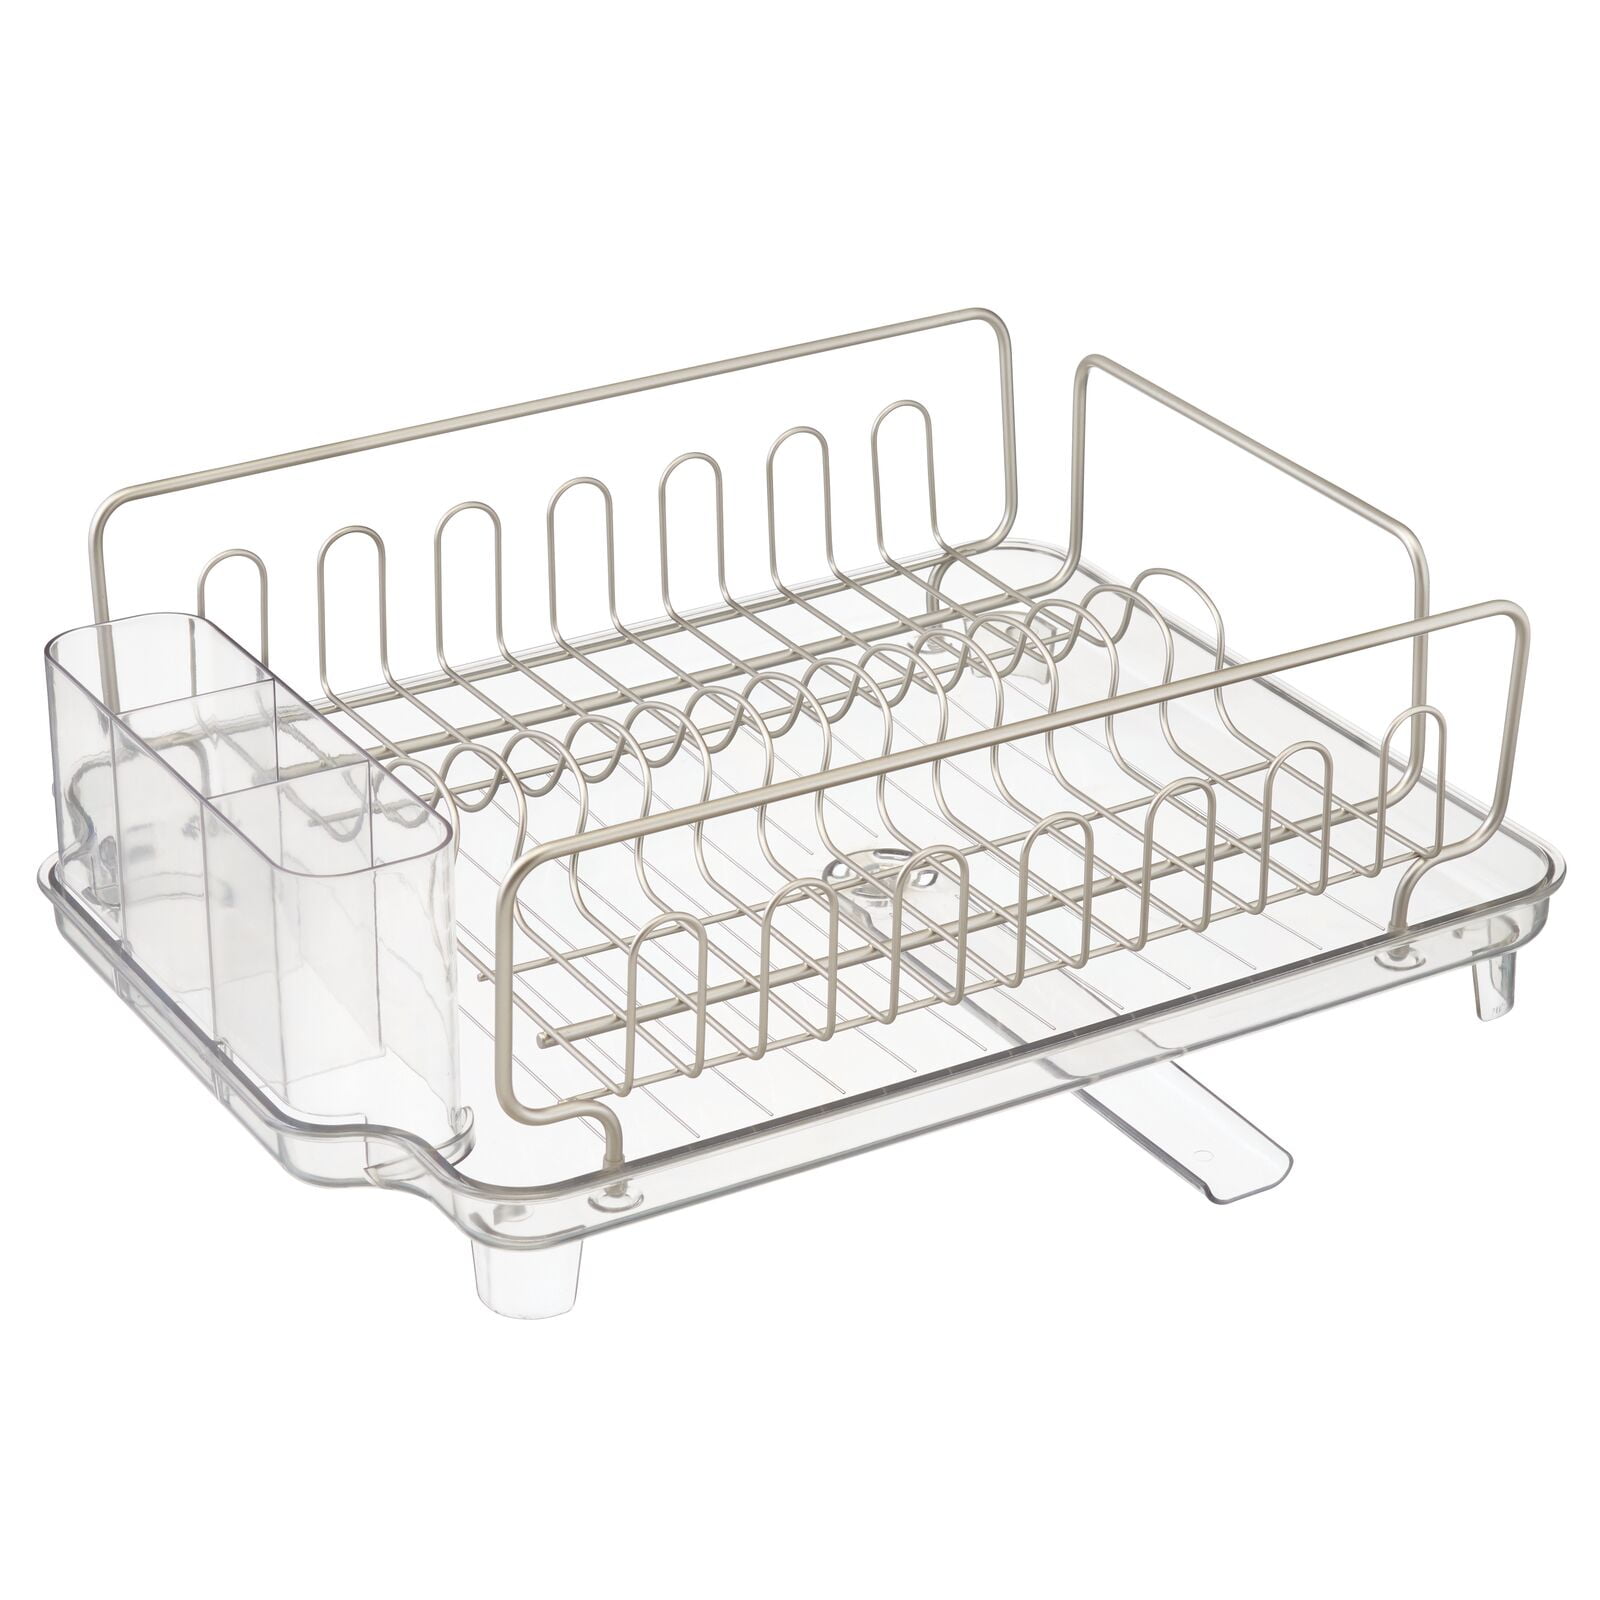 Details about   Better Homes & Gardens Gray Wire Dish Drying Rack Large Capacity Removable Caddy 